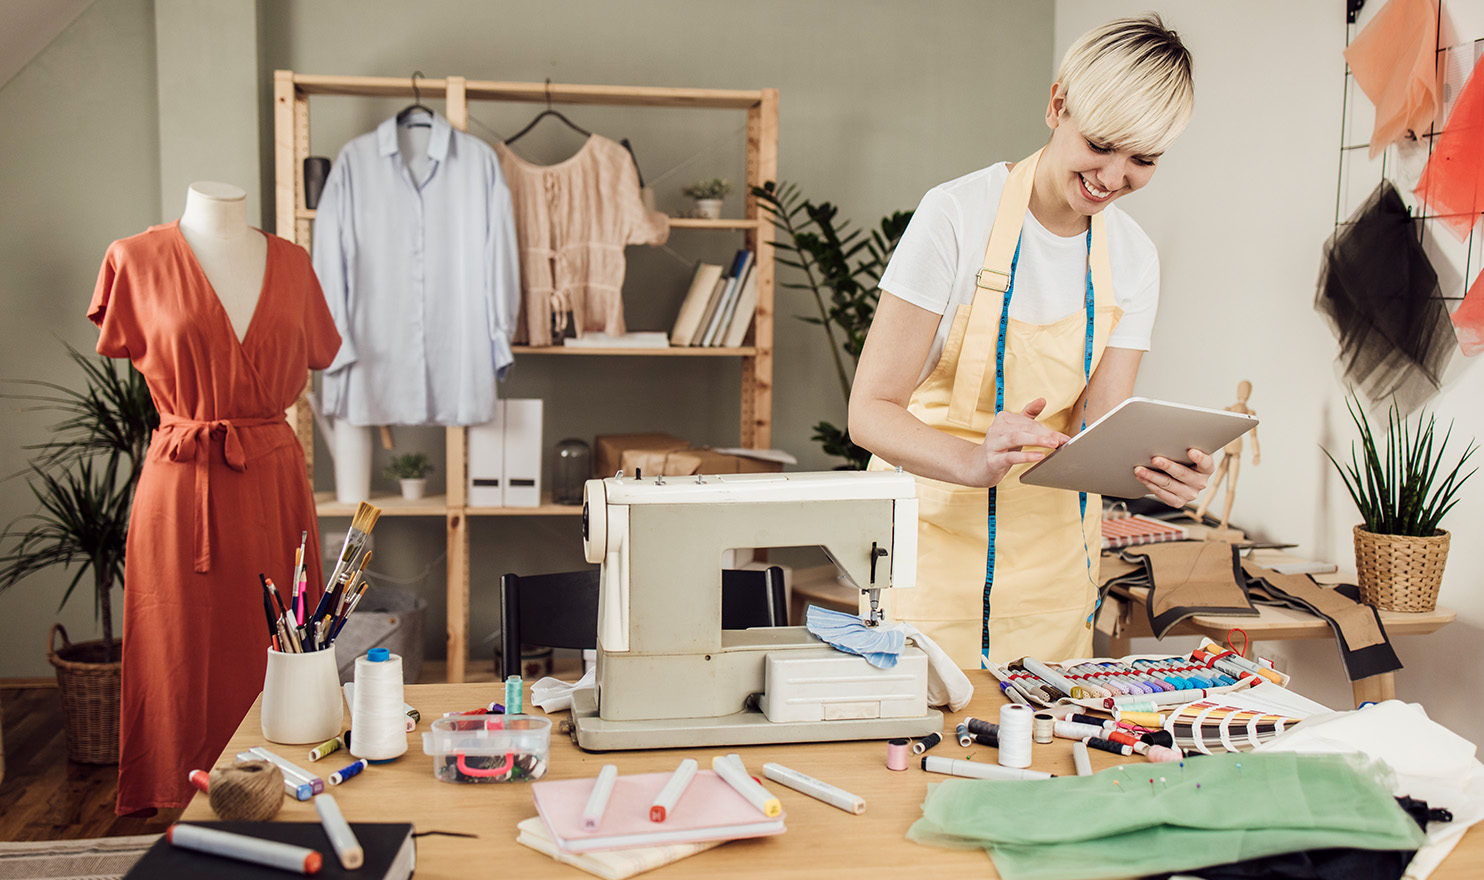 A seamstress is working in her home studio and is purchasing product liability insurance on her electronic tablet while standing next to her sewing table full of supplies.